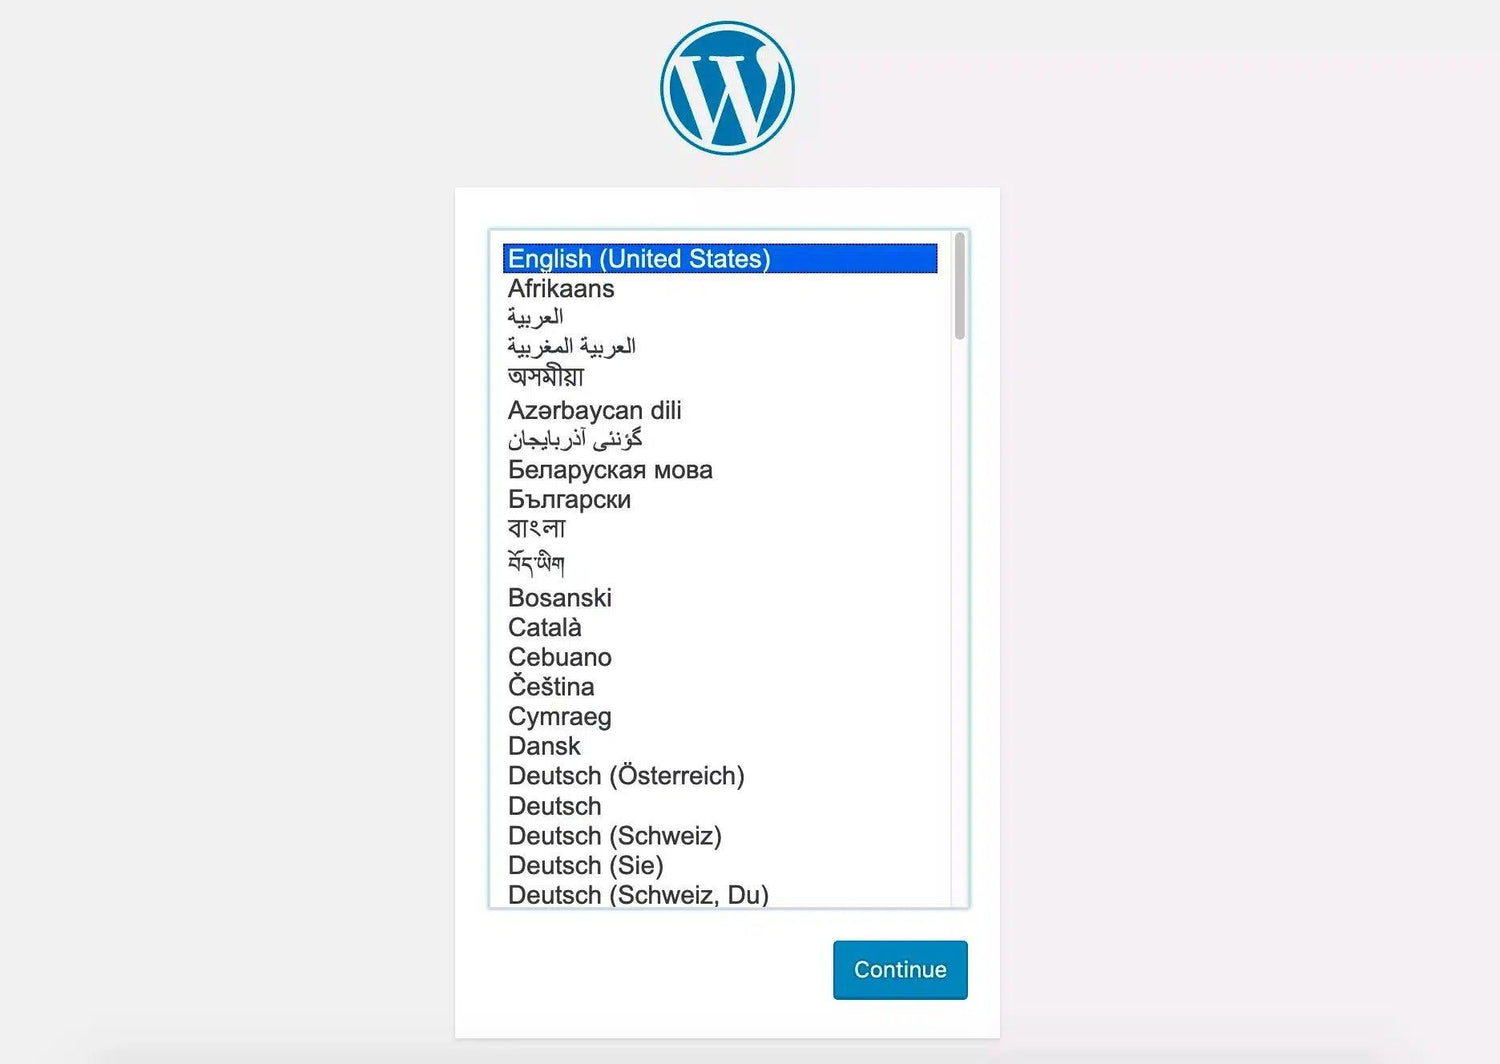 15 Steps to install and configure WordPress on your server